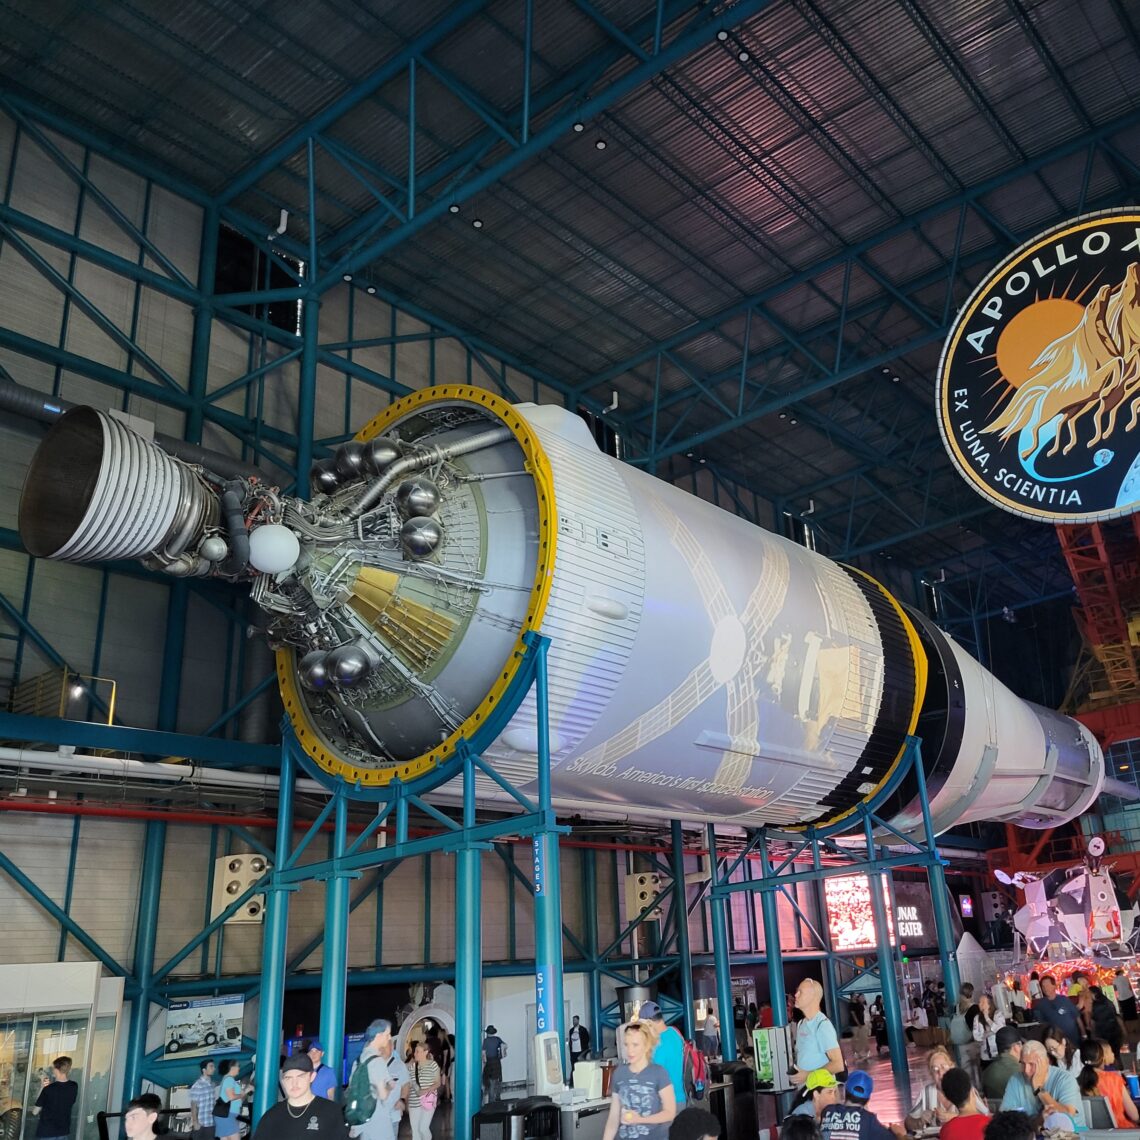 The Saturn V display at Kennedy Space Center.